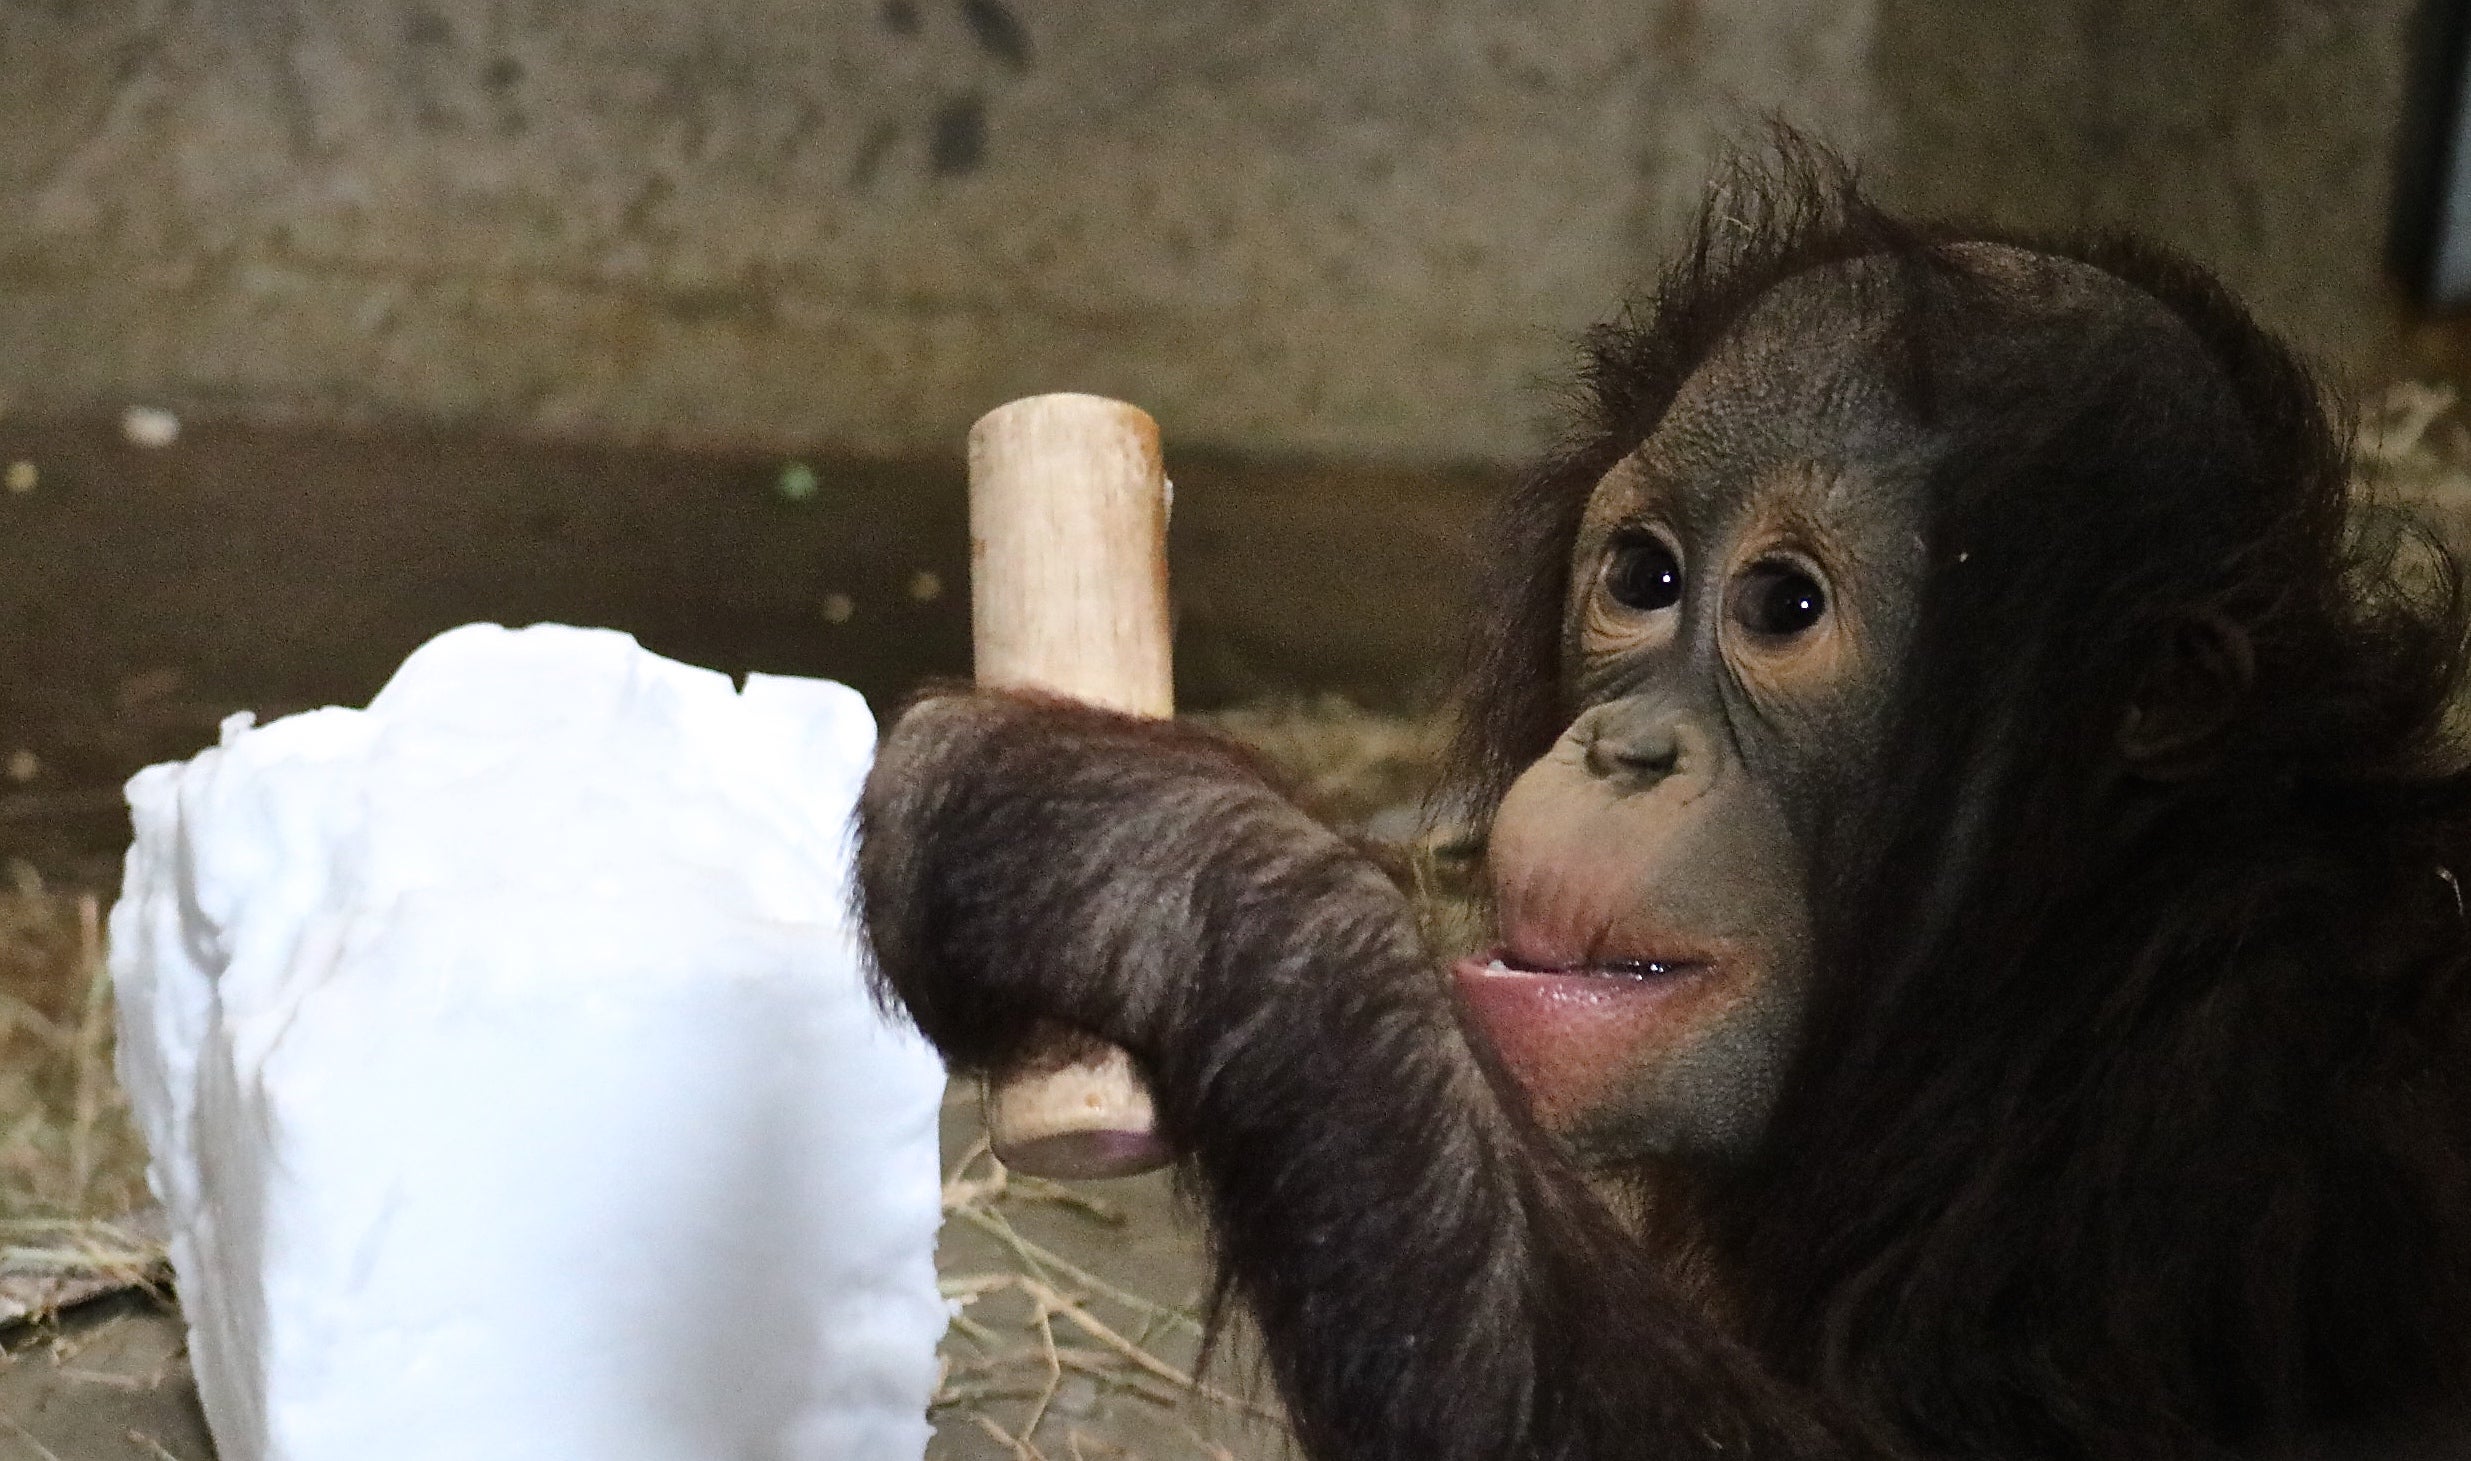 Infant orangutan Redd holds a wooden tool and plays with a block of snow